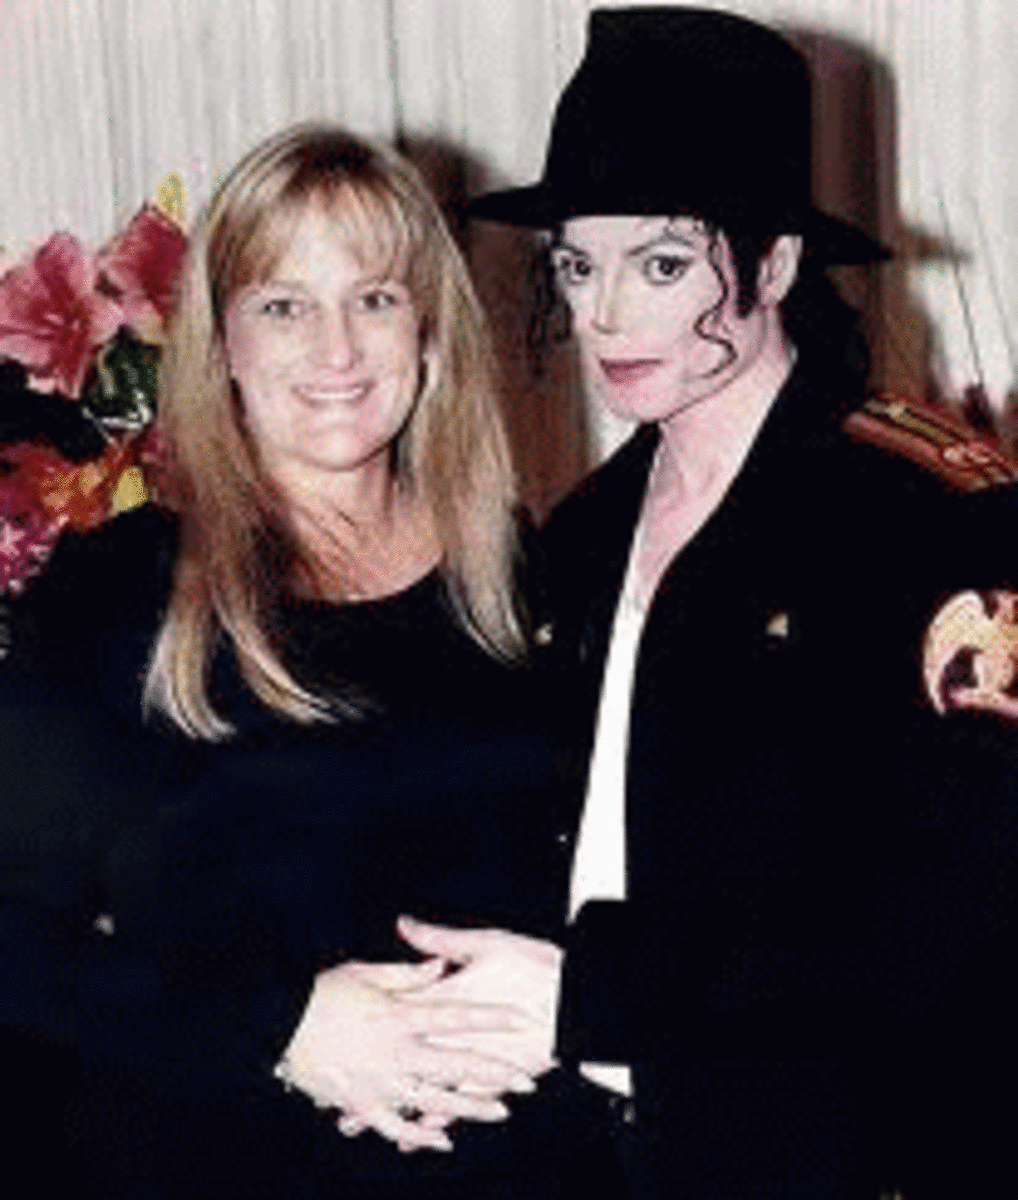 Michael and 2nd wife Debbie Rowe, mom of 2 of his children.